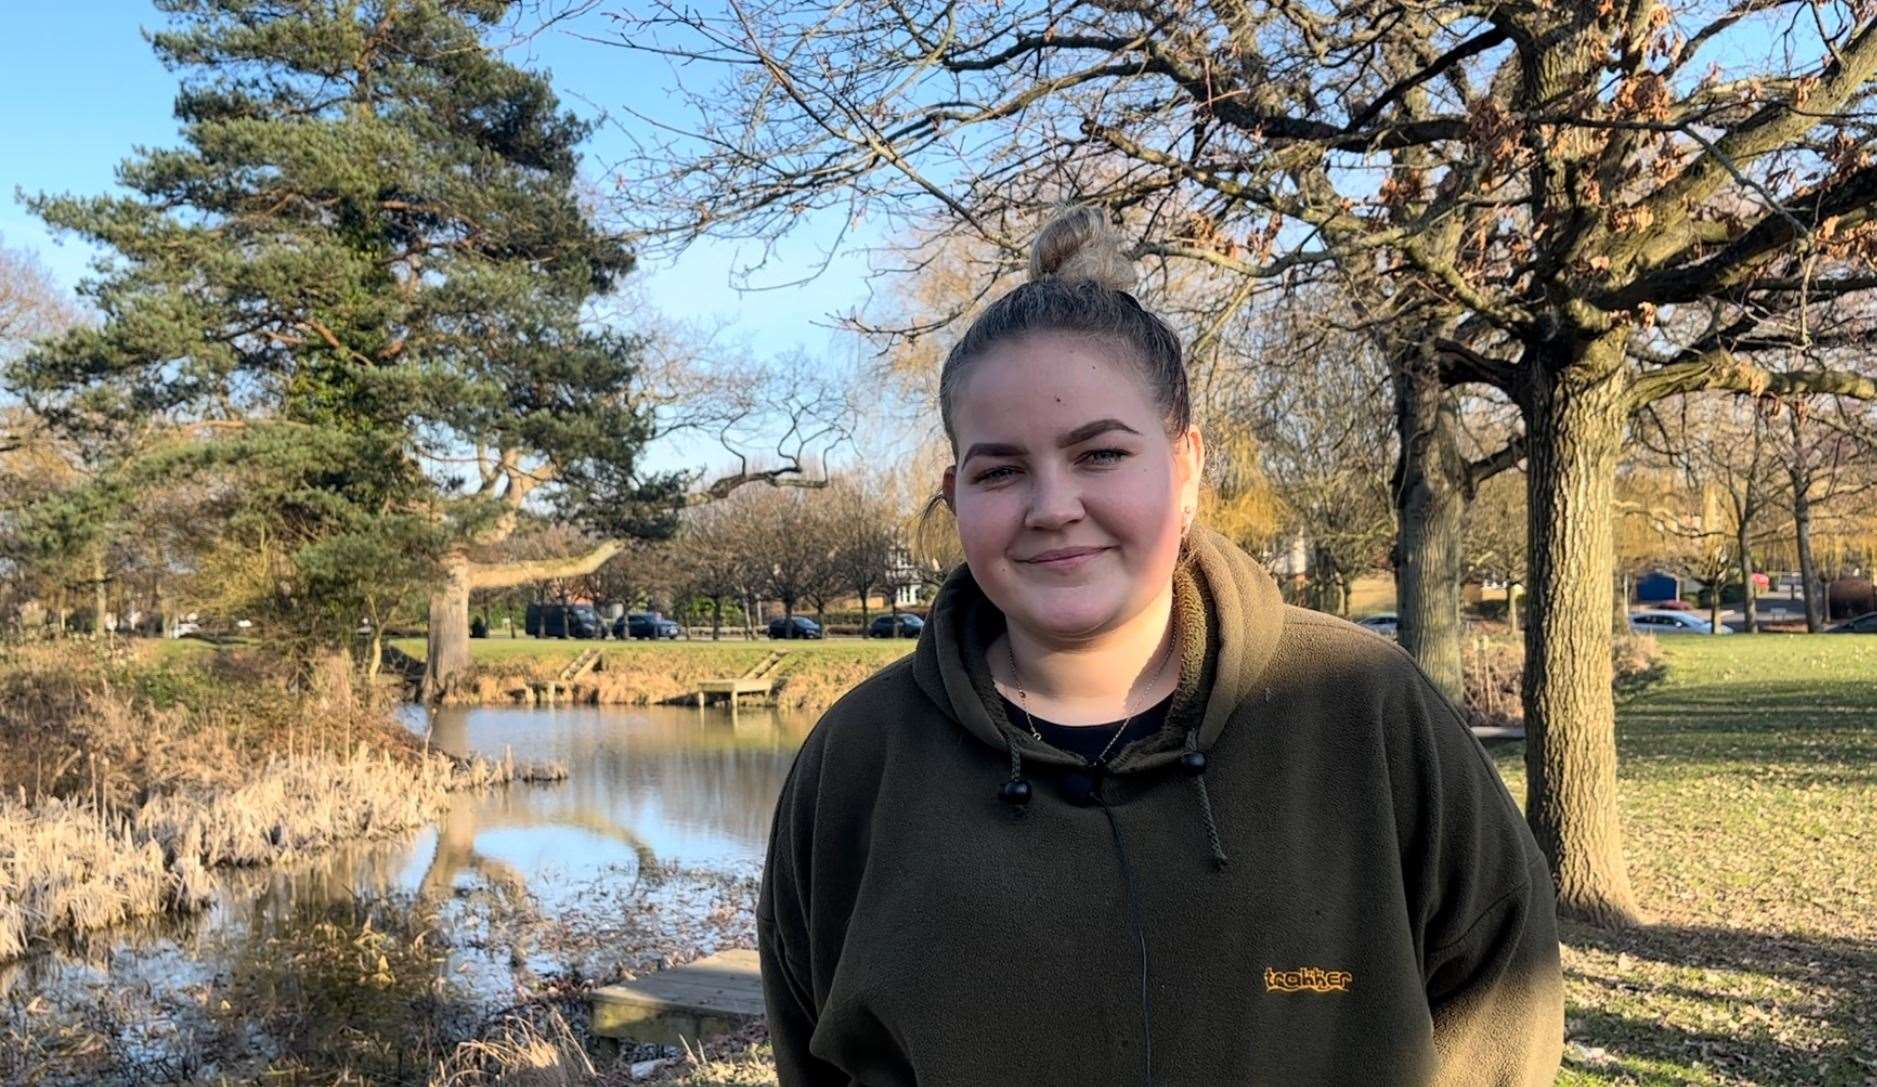 Jemma Coales, 23, says fishing has helped her mental health hugely